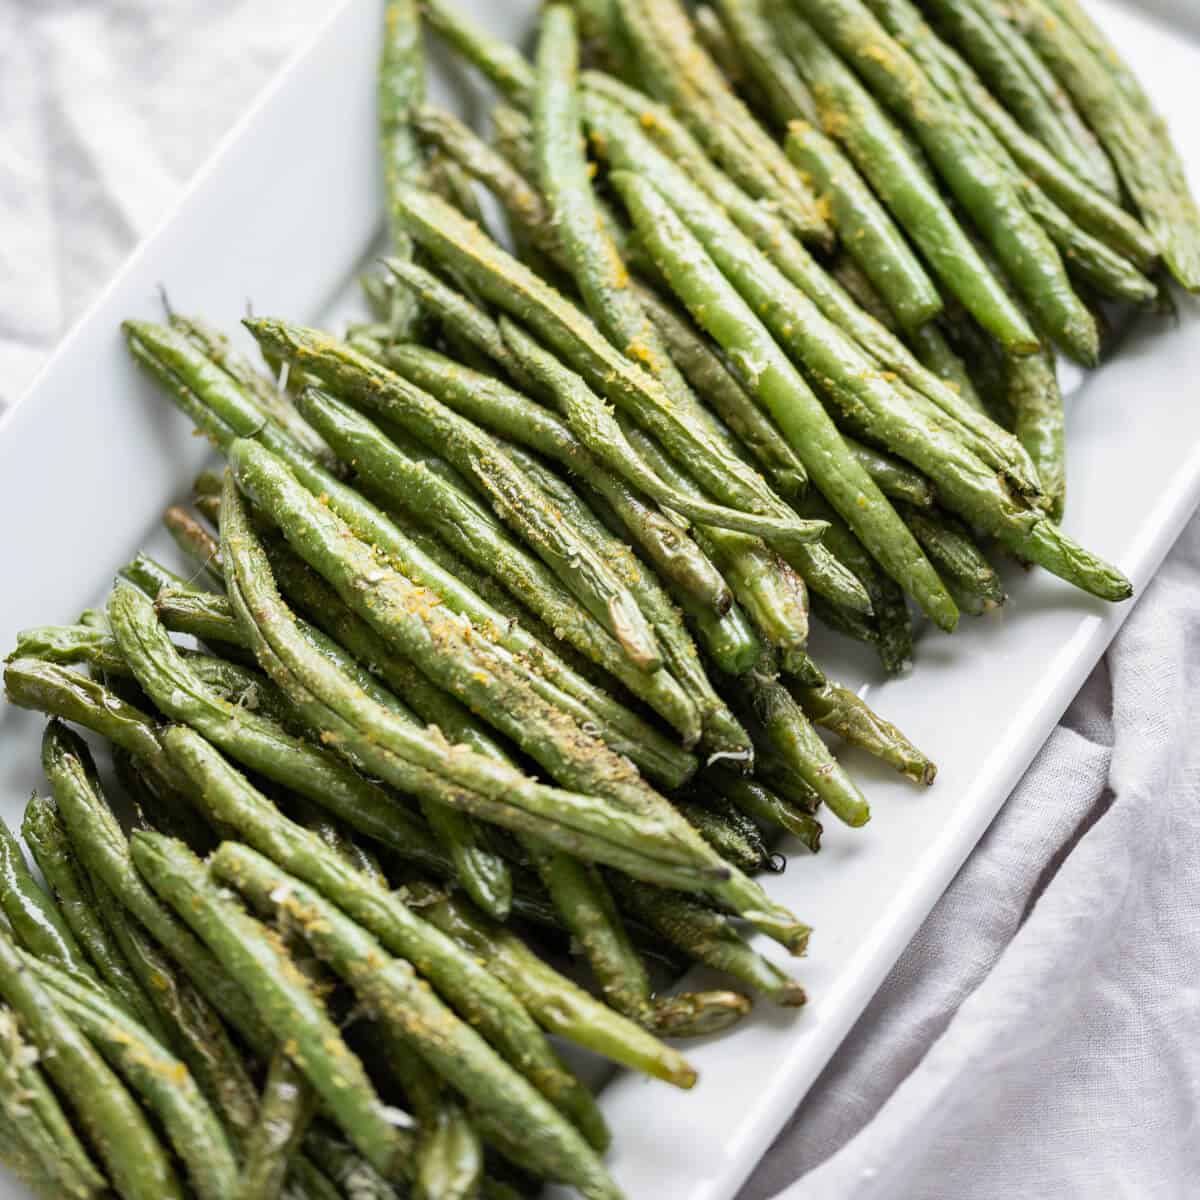 https://www.artfrommytable.com/wp-content/uploads/2022/01/air_fried_green_beans_square.jpg